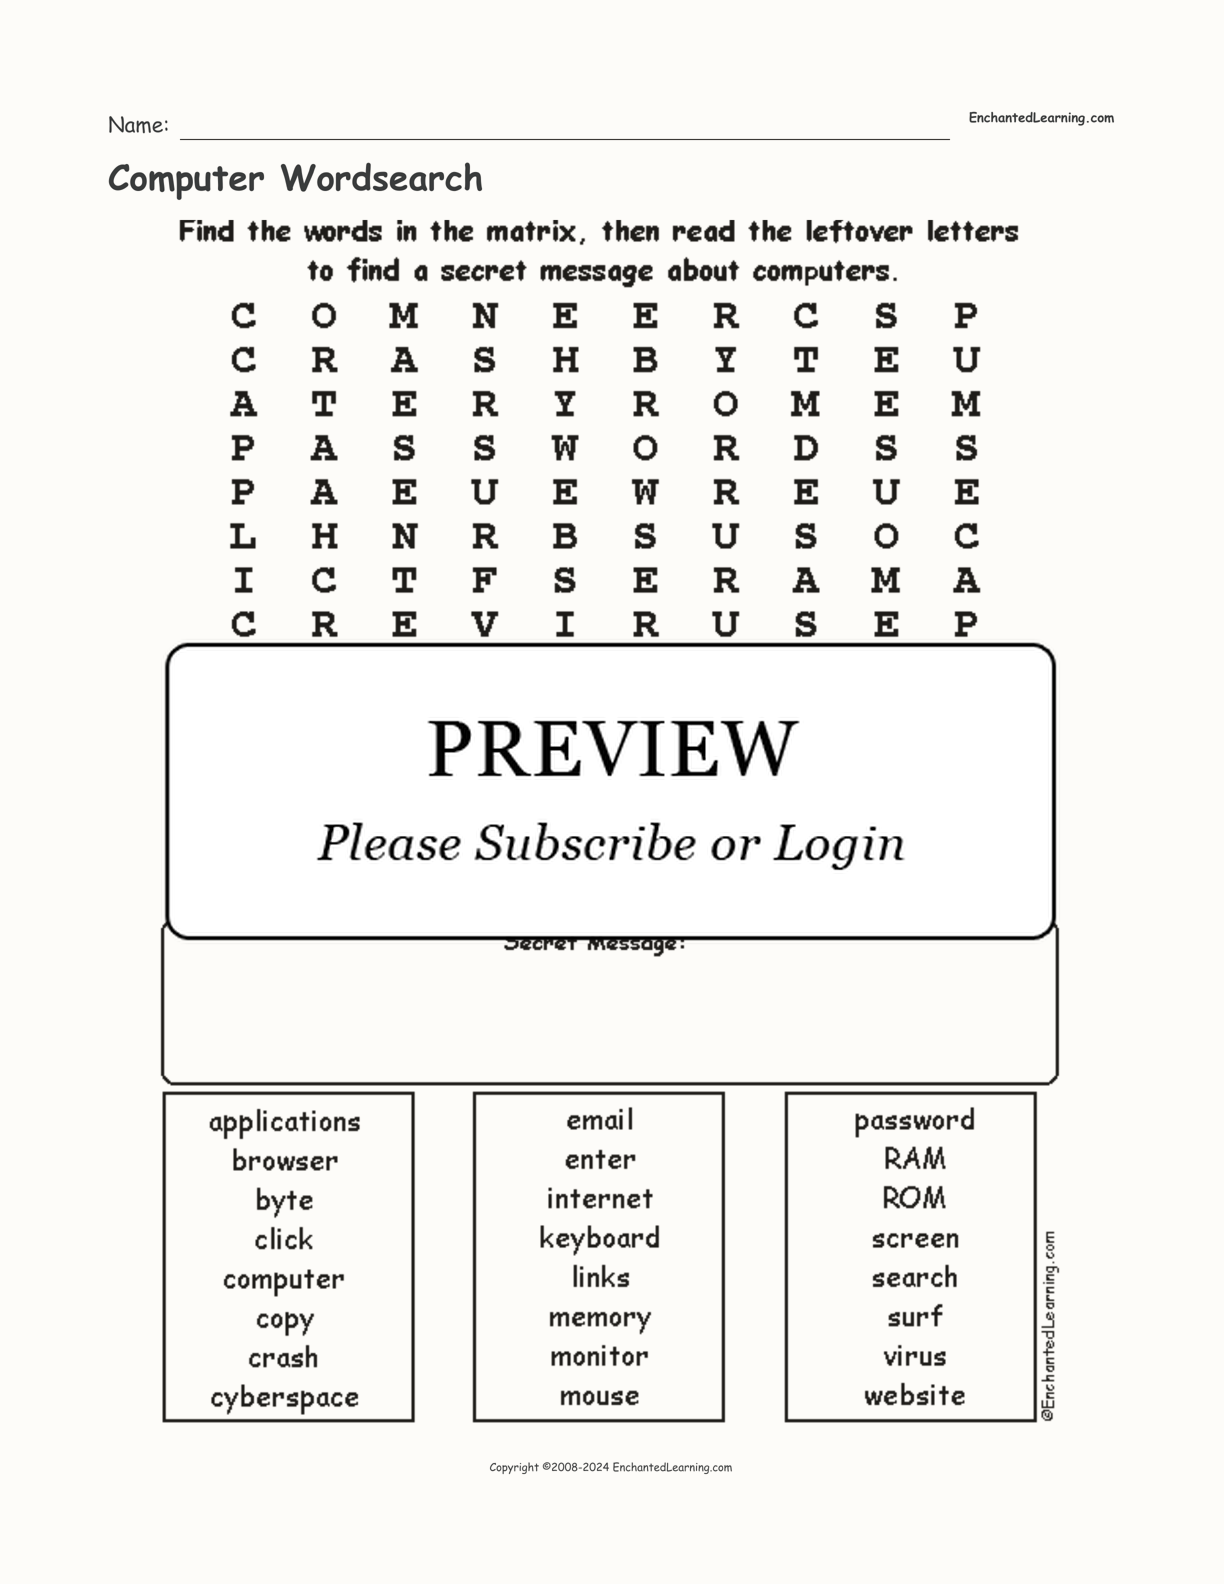 Computer Wordsearch interactive worksheet page 1